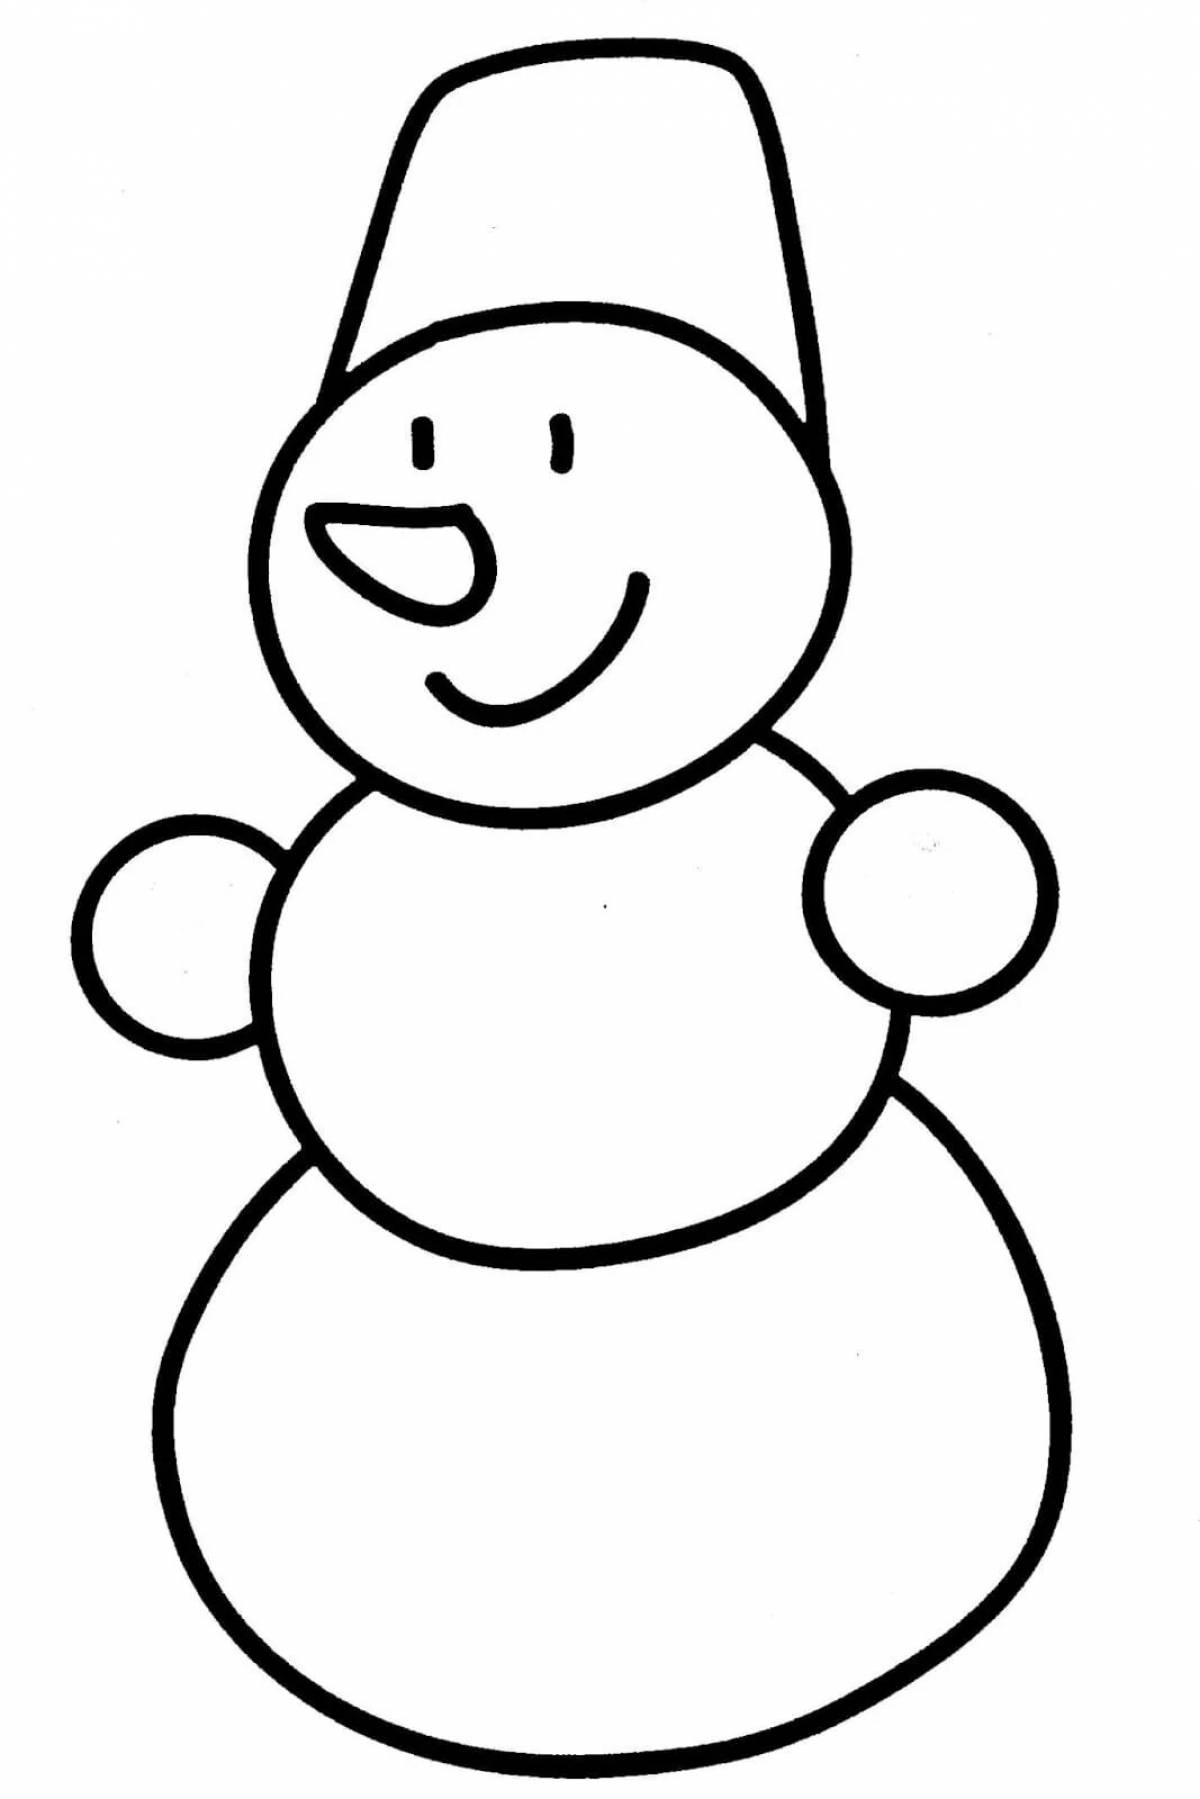 Awesome snowman drawing for kids